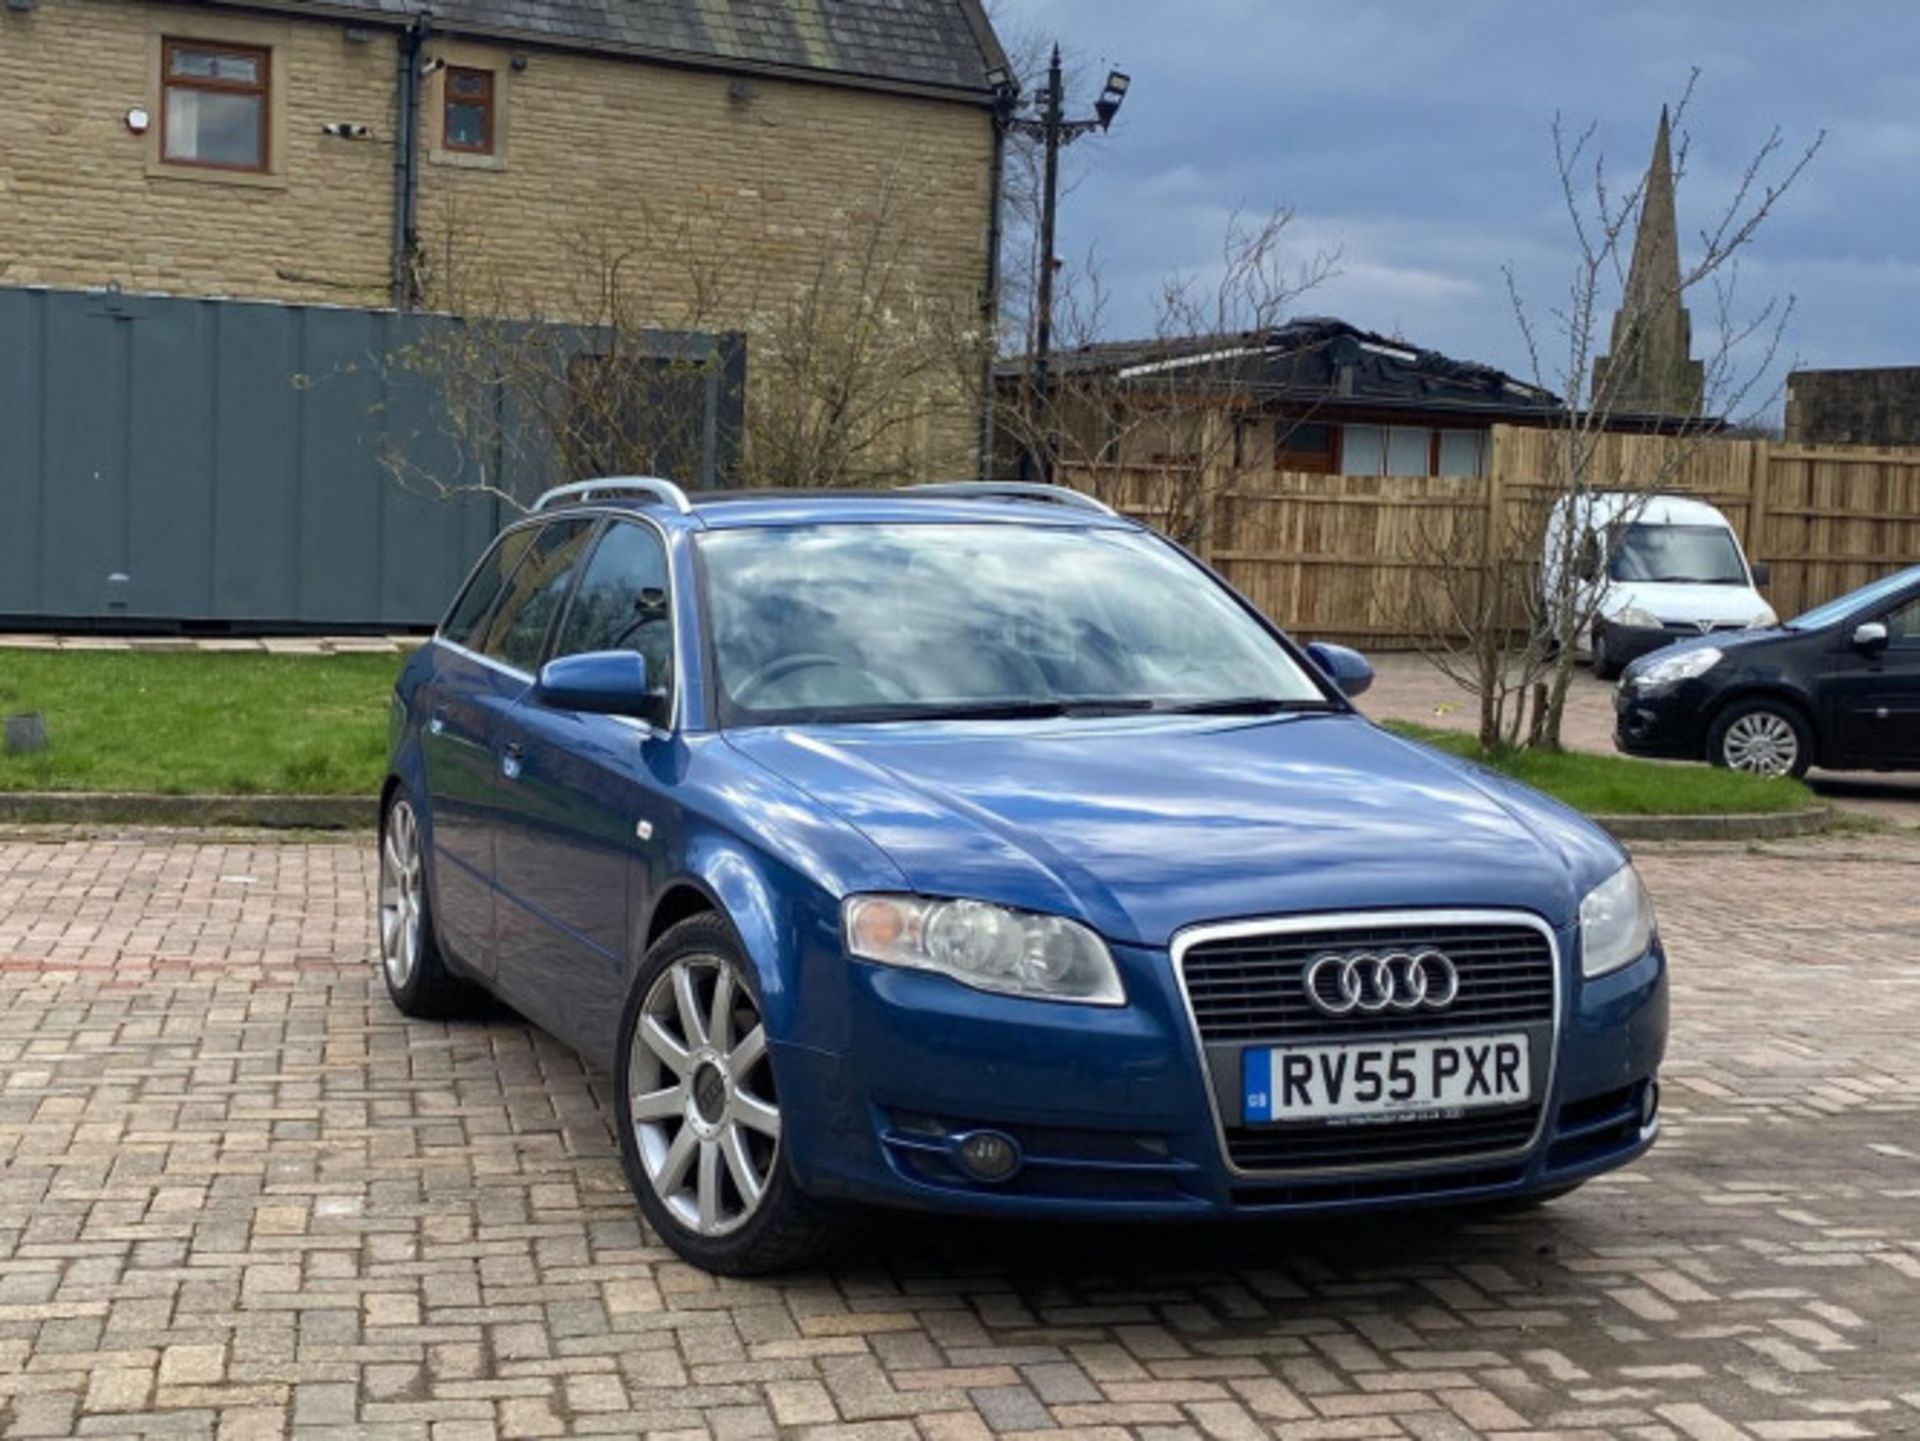 AUDI A4 AVANT 1.9 TDI SE 5DR ESTATE - RARE AND RELIABLE LUXURY WAGON >>--NO VAT ON HAMMER--<< - Image 97 of 97